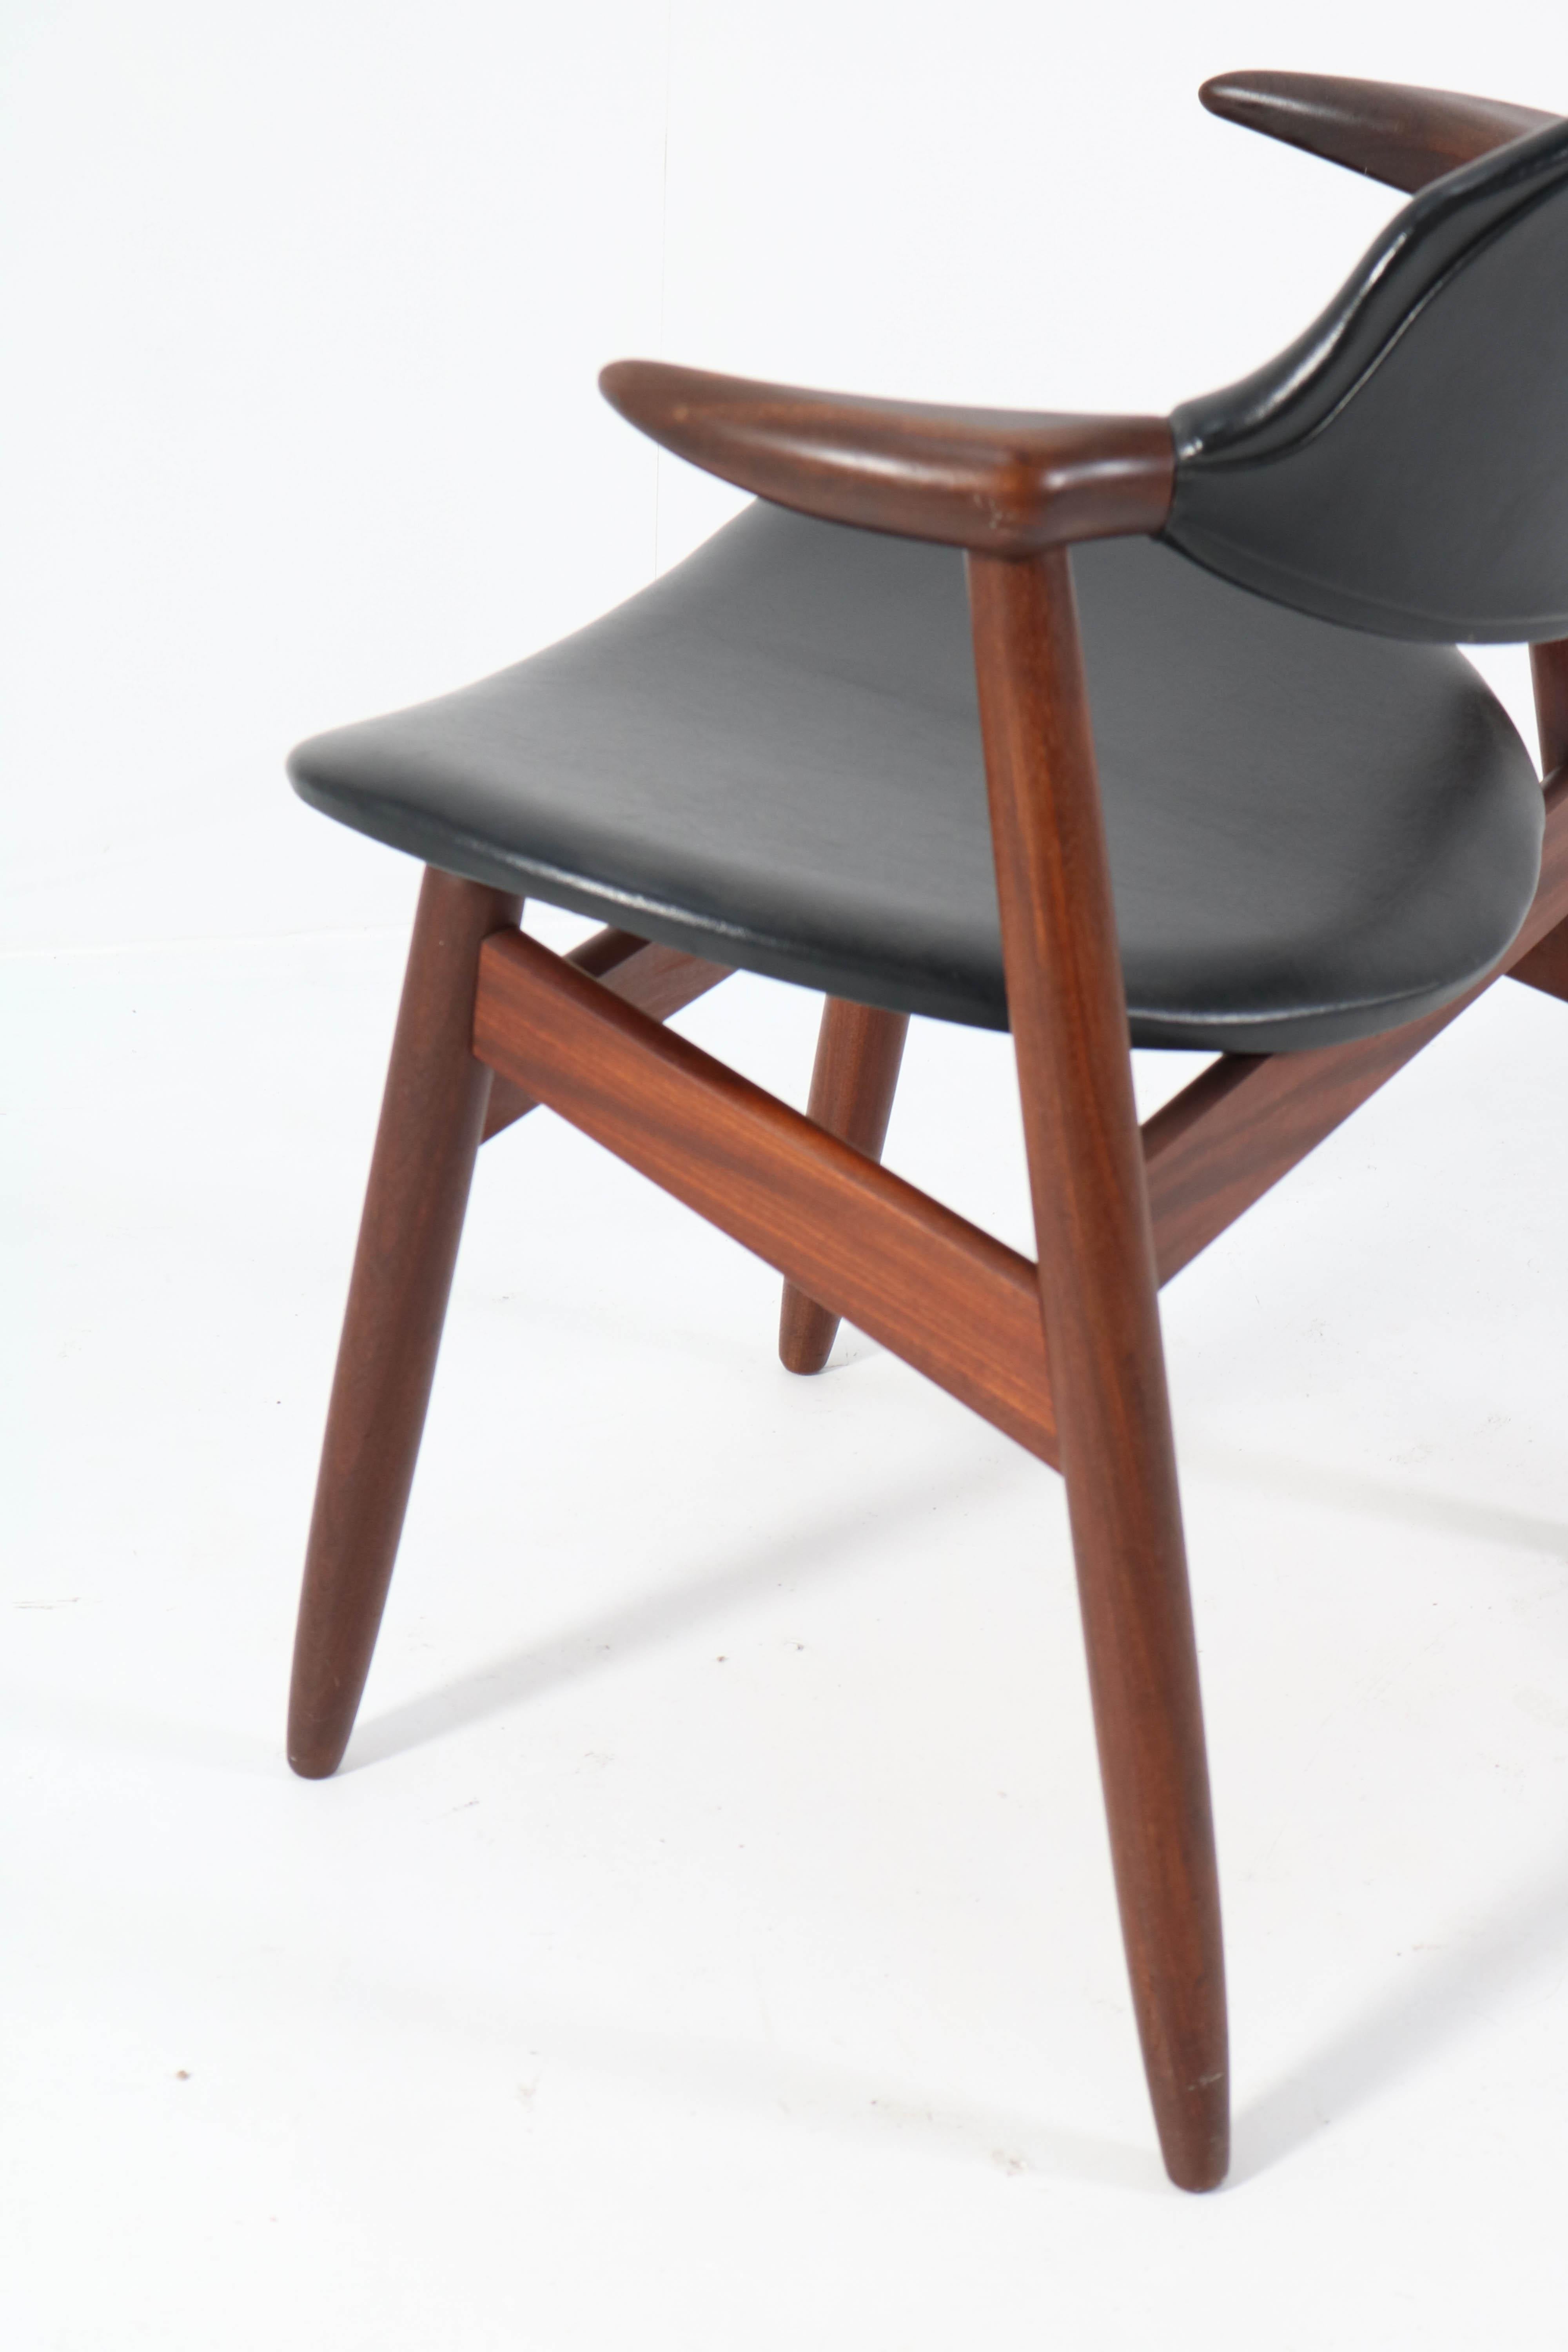 Two Mid-Century Modern Teak Cowhorn Chairs by Tijsseling for Hulmefa, 1960s For Sale 9